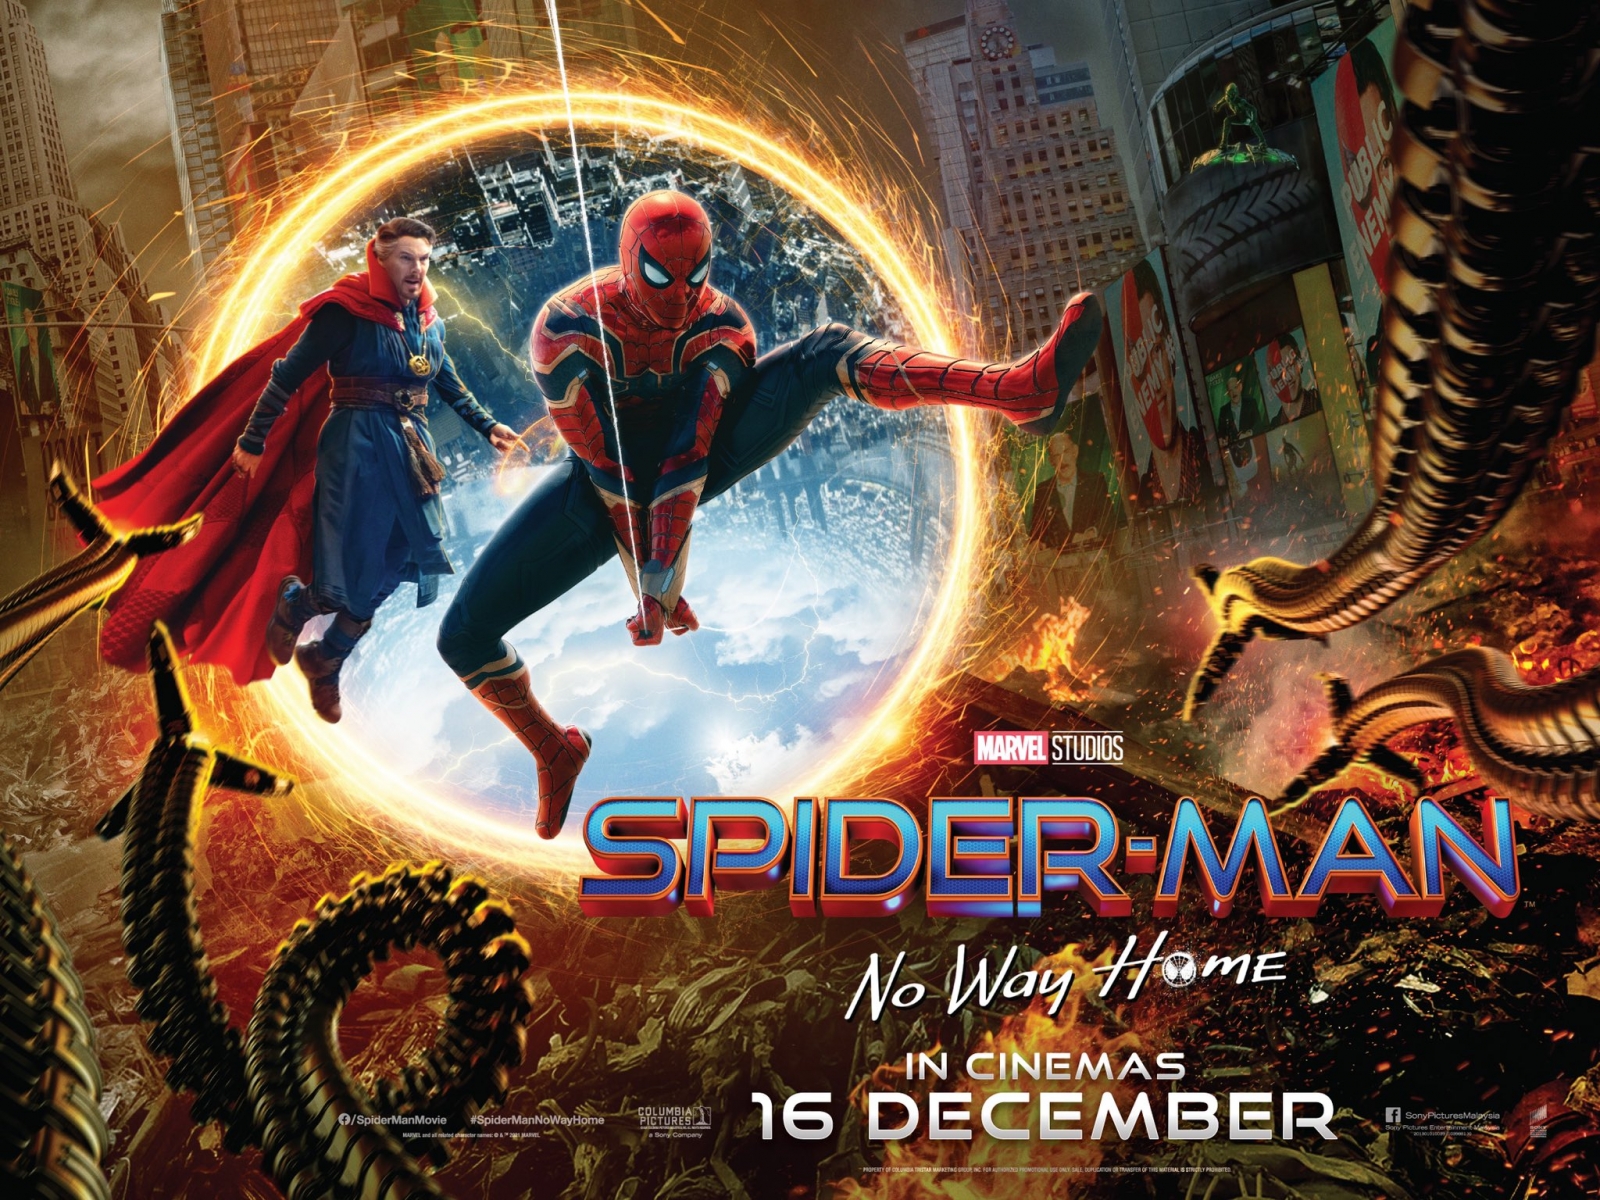 Malaysia spider man release date Hot Toys